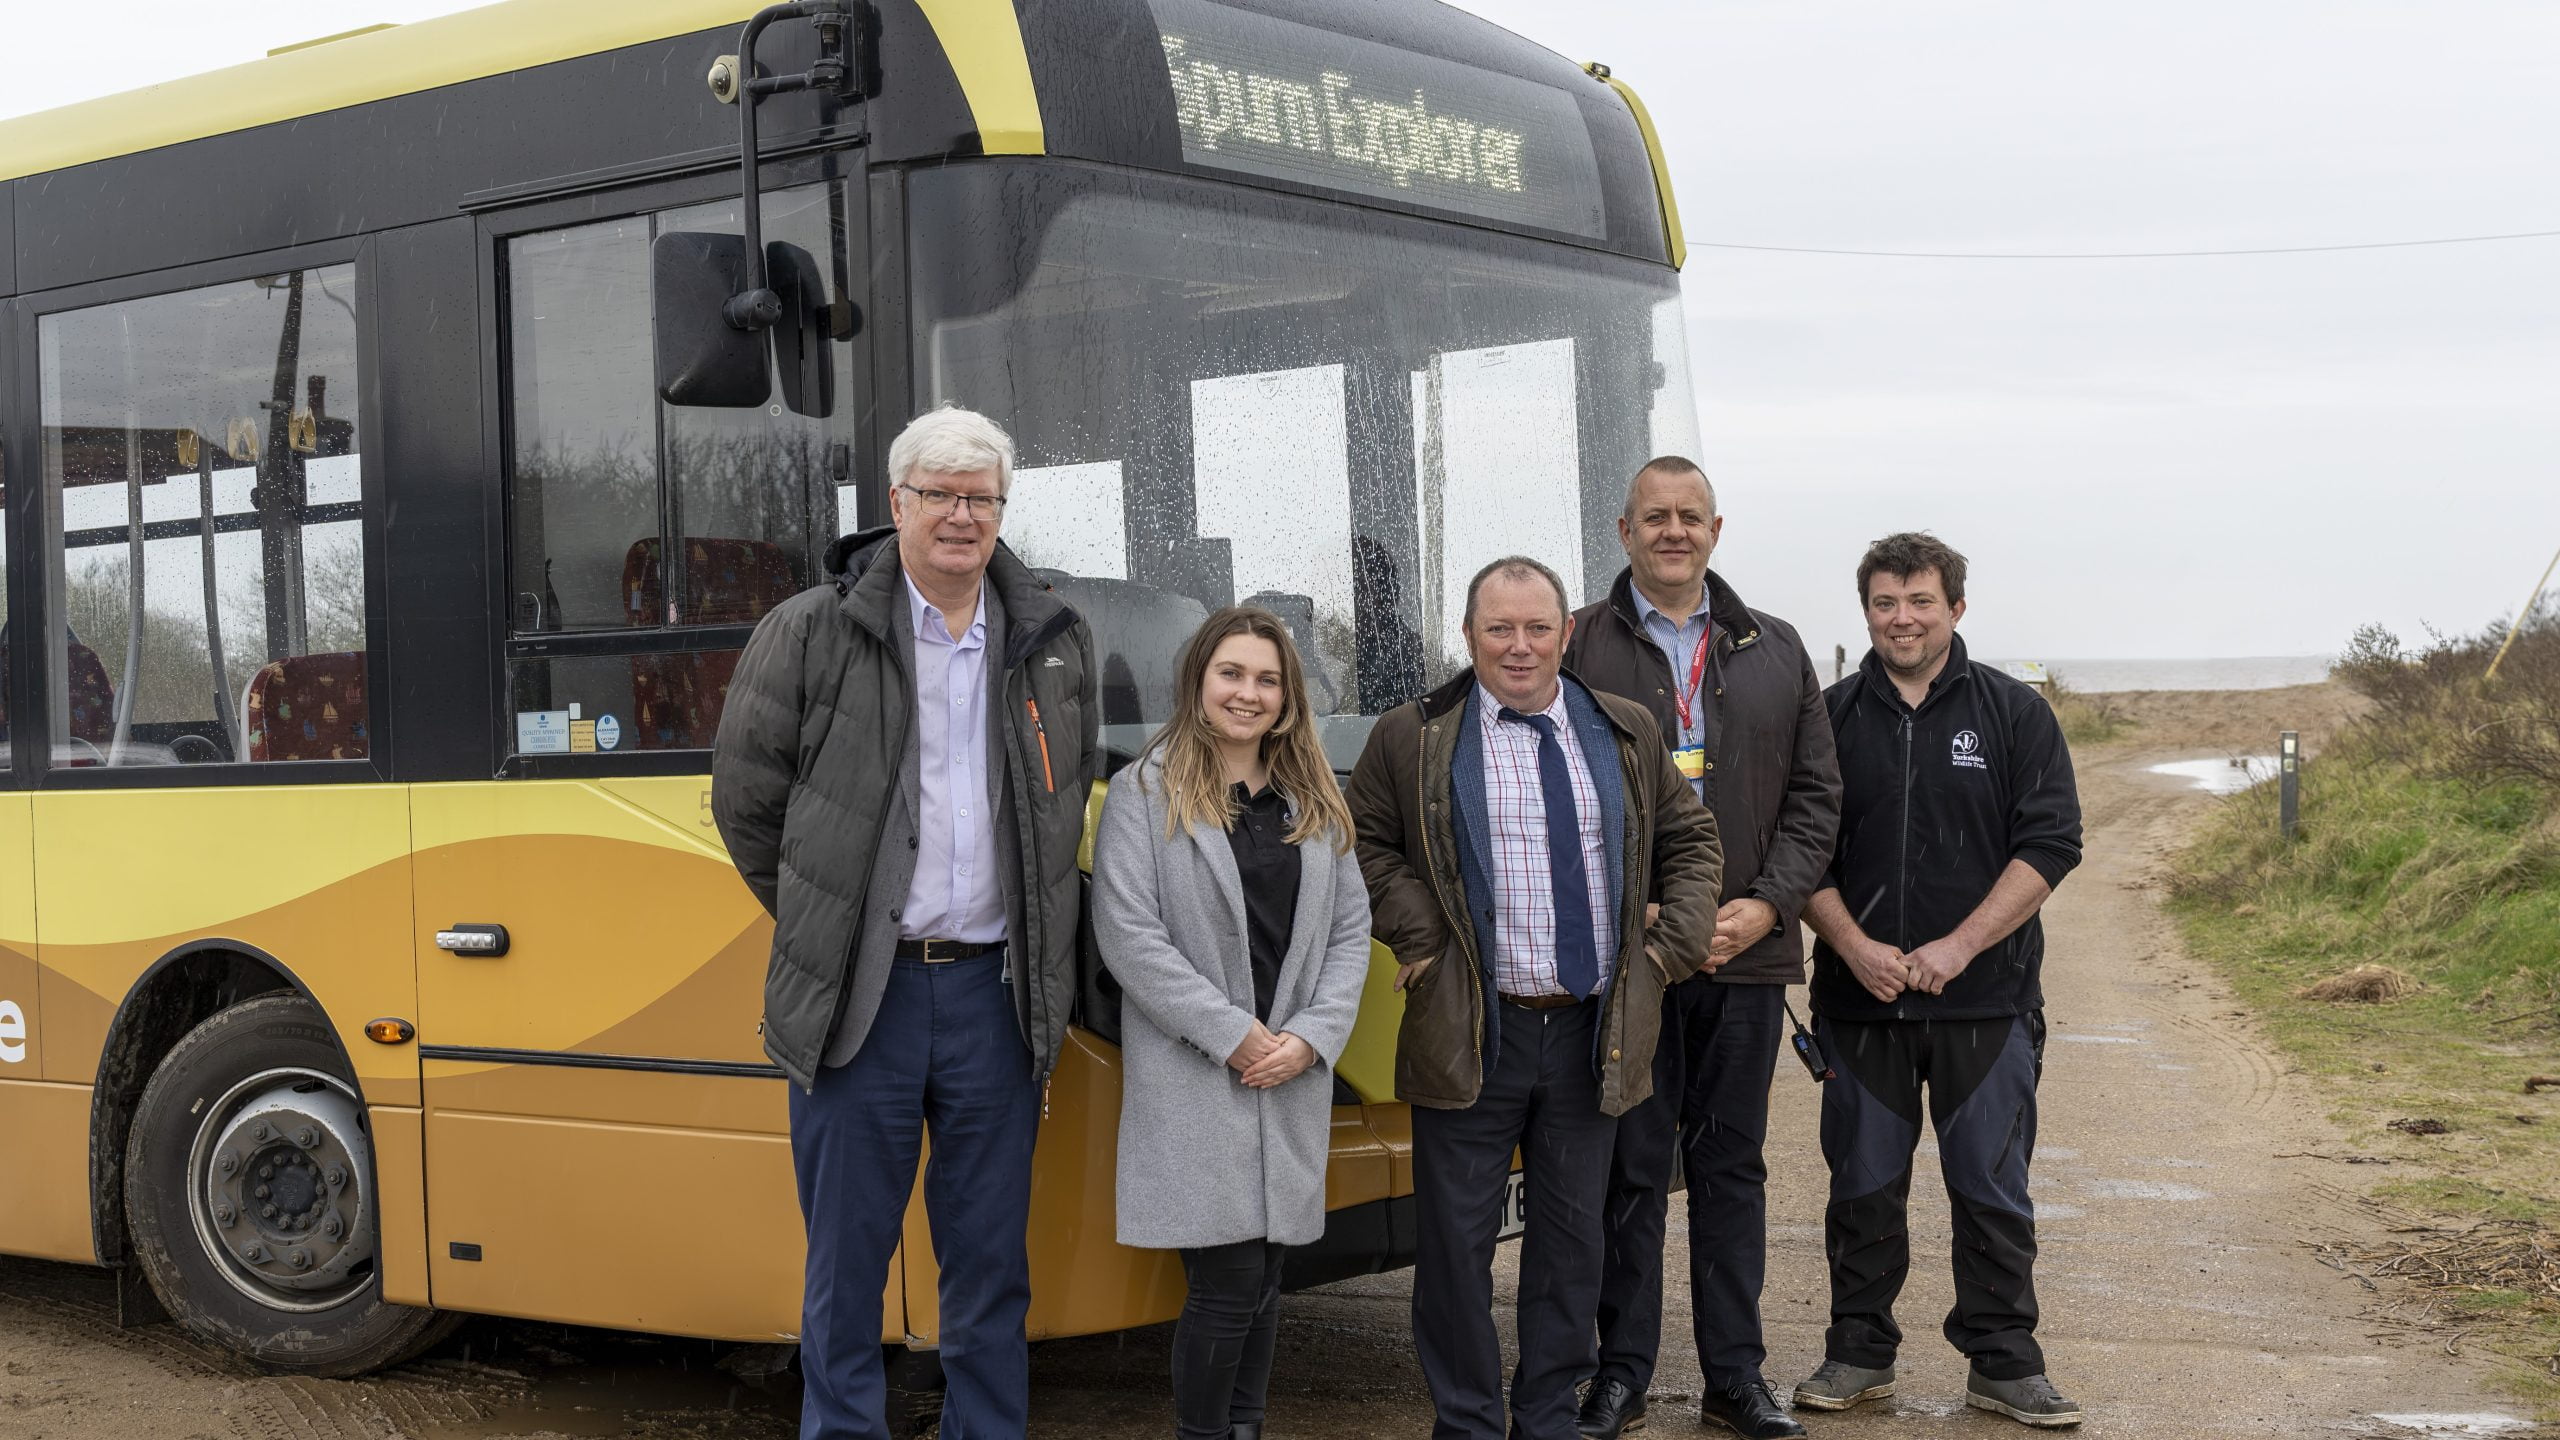 NEW WEEKEND BUS SERVICE LAUNCHES TO TAKE PASSENGERS TO SPURN NATIONAL NATURE RESERVE 